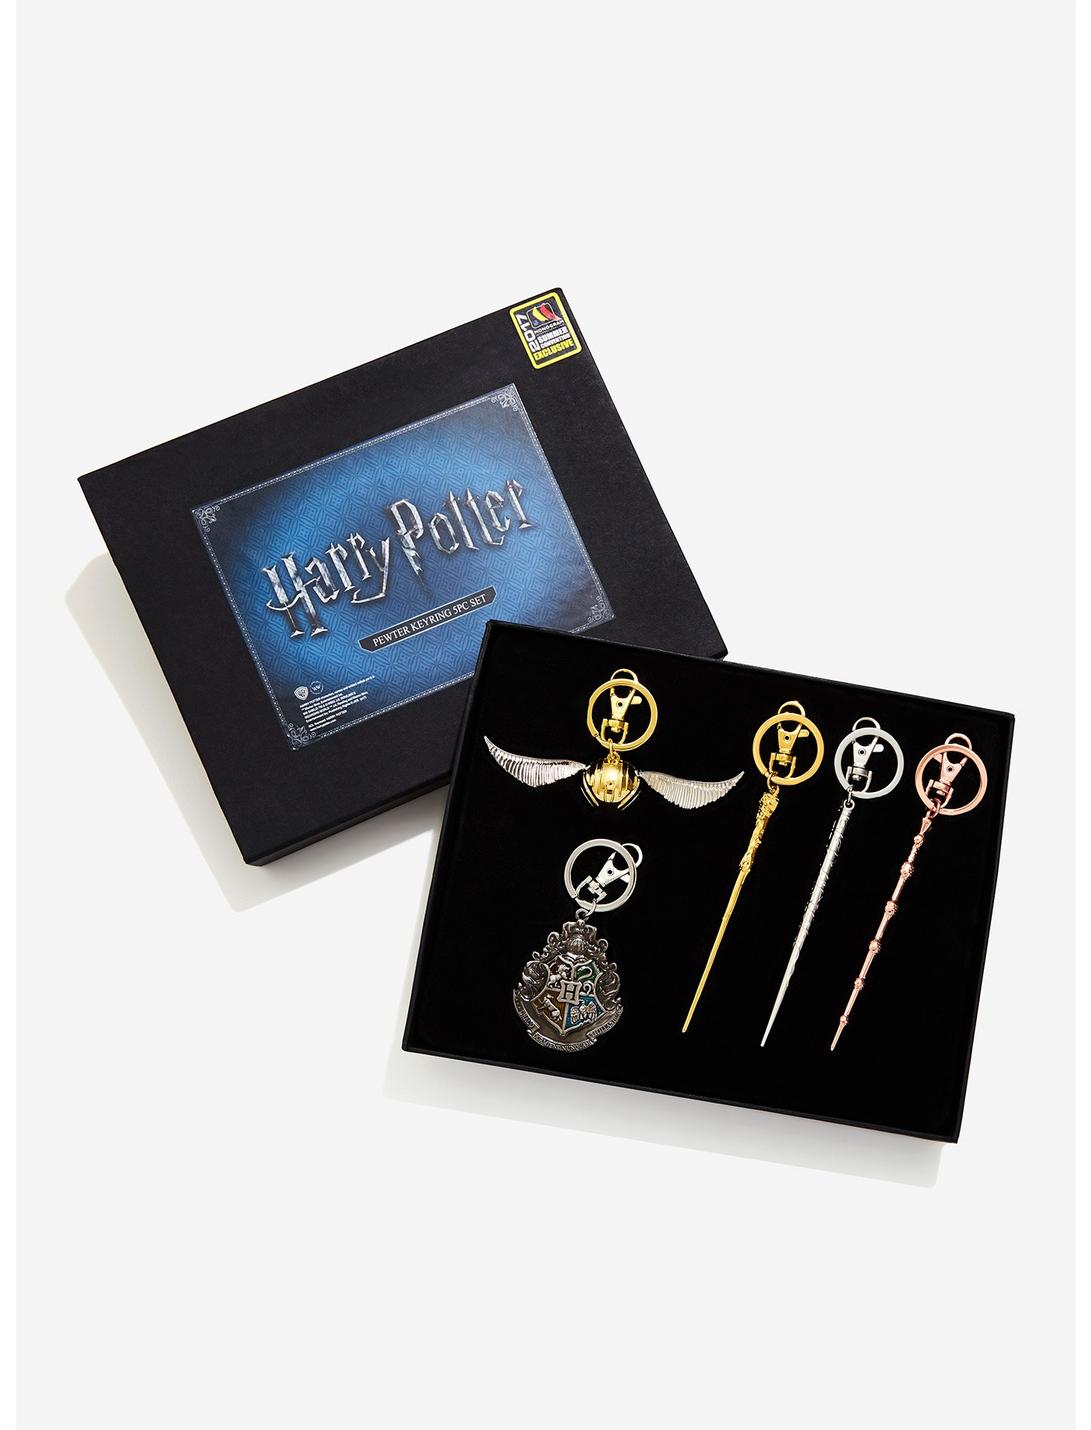 Harry Potter Pewter Key Chain Set - 2017 Summer Convention Exclusive, , hi-res